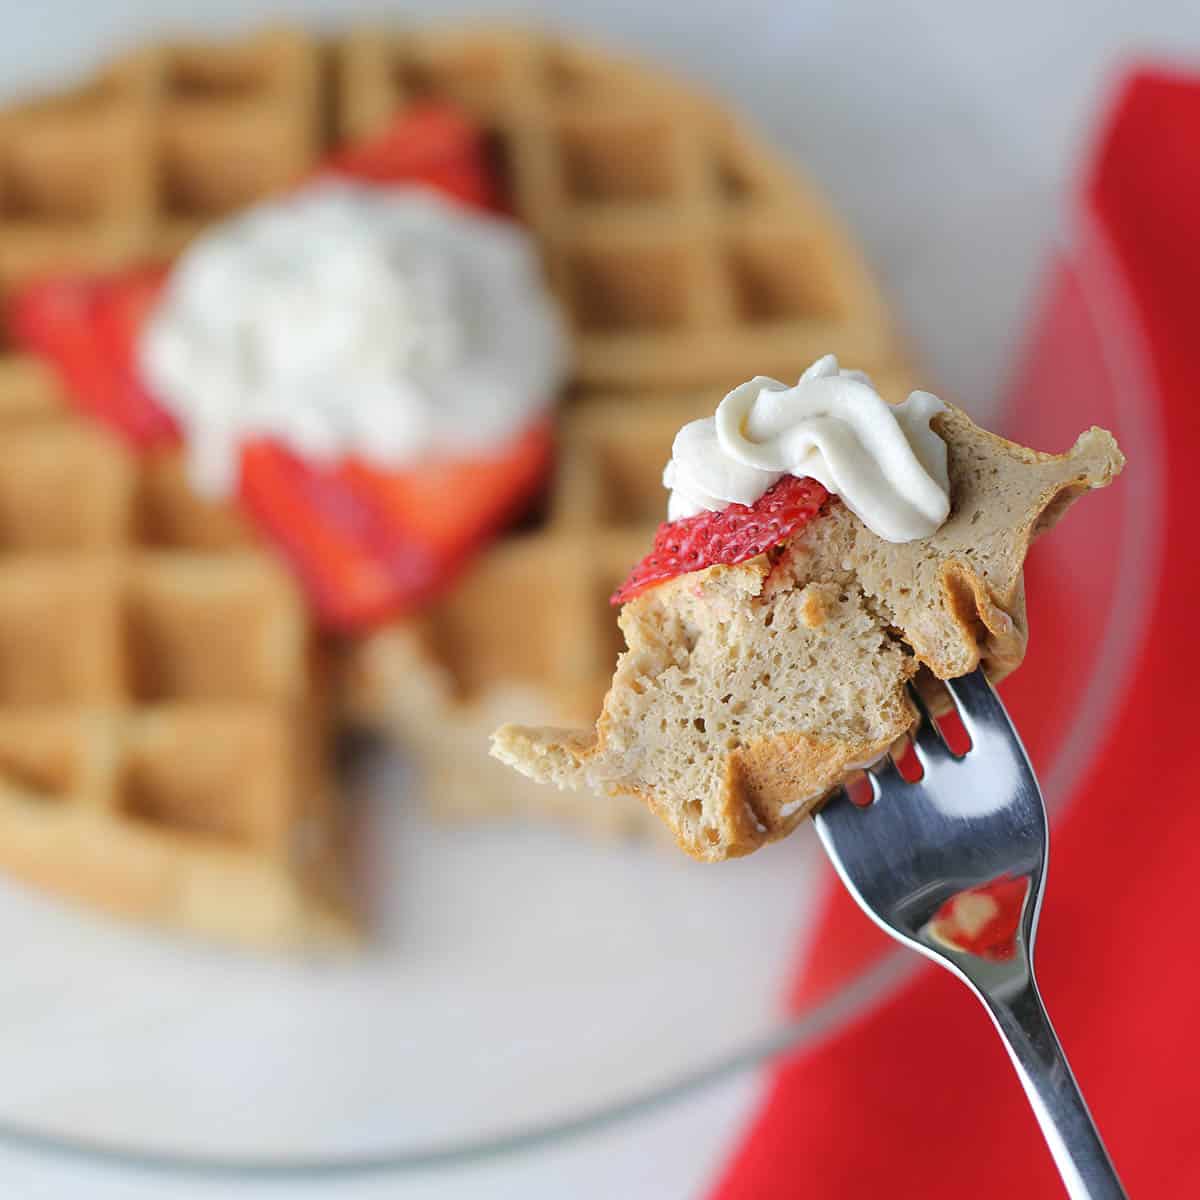 a bite of low carb protein waffle with strawberry and whipped cream on a fork in the front, and in the background is the rest of the waffle on a glass plate with a red linen napkin